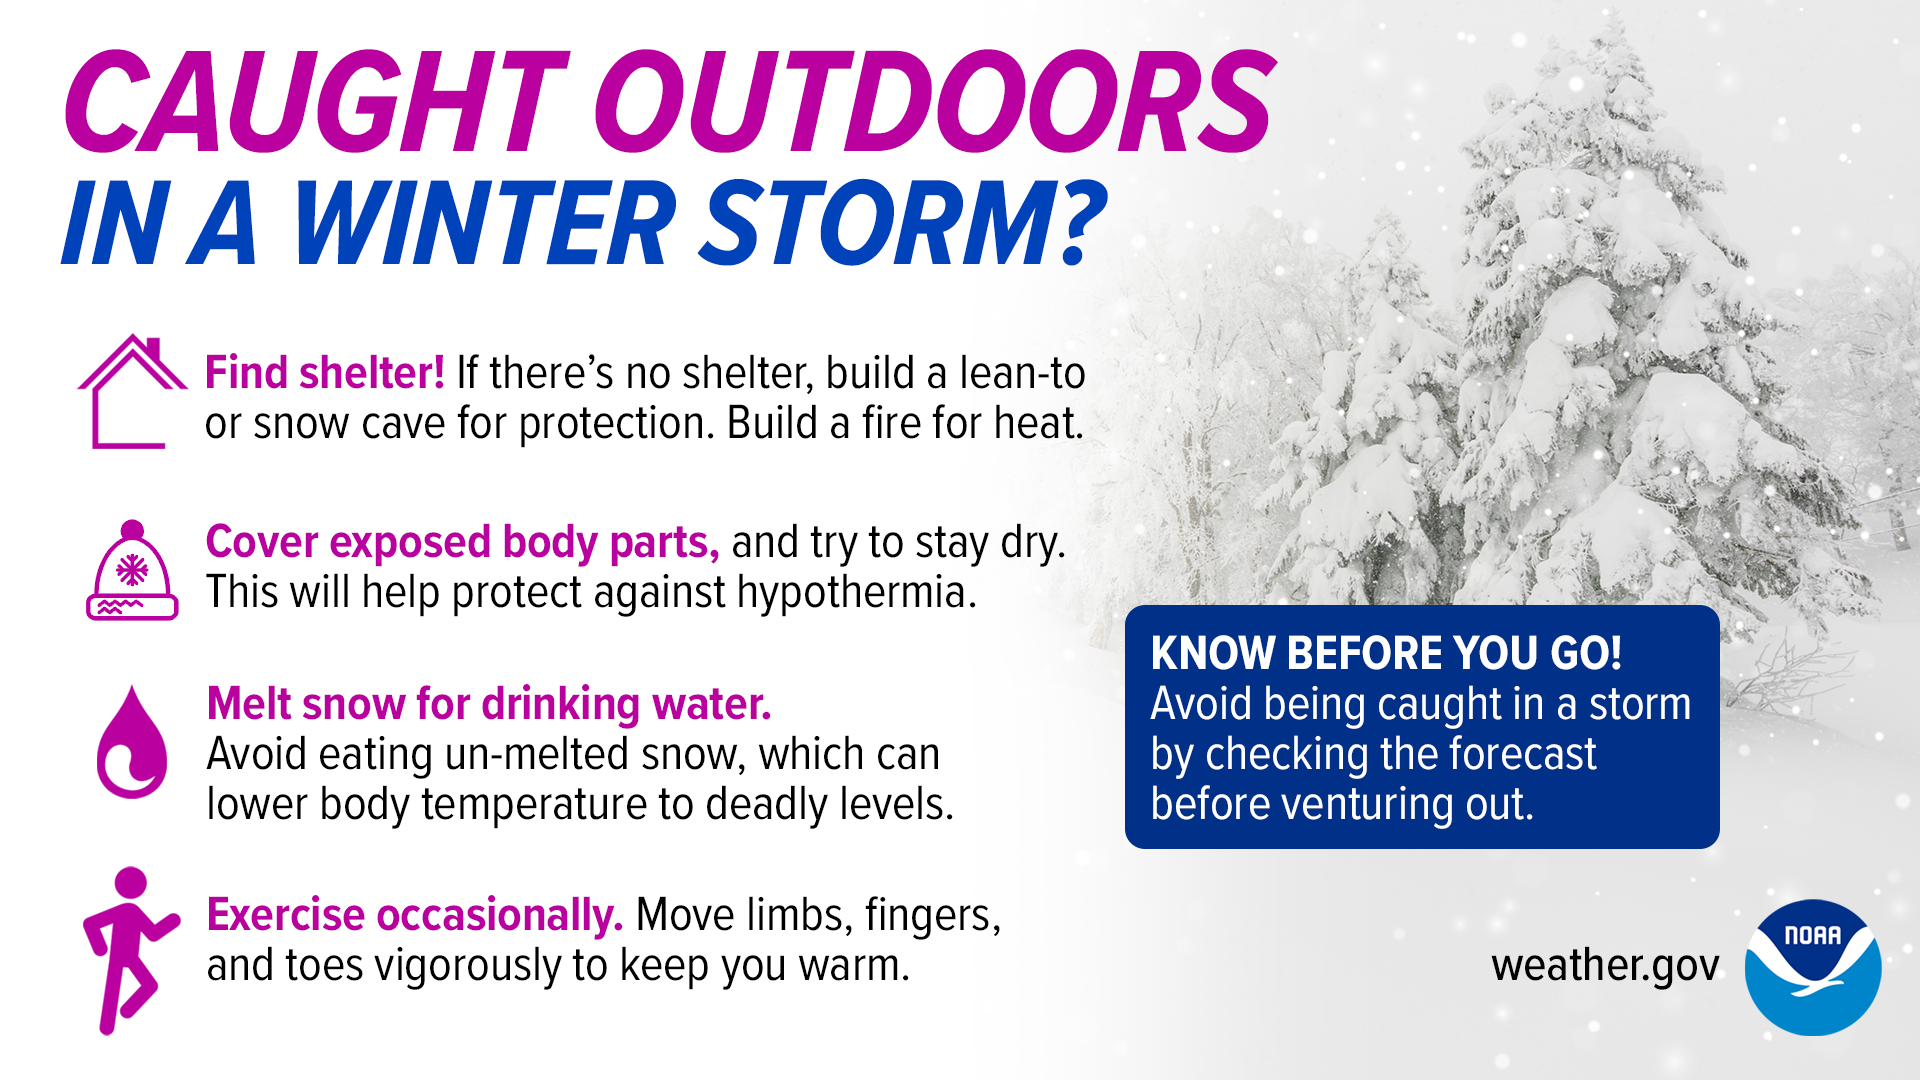 Caught outdoors in a winter storm? Find shelter! If there’s no shelter, build a lean-to or snow cave for protection. Build a fire for heat. Cover exposed body parts, and try to stay dry. This will help protect against hypothermia. Melt snow for drinking water. Avoid eating un-melted snow, which can lower body temperature to deadly levels. Exercise occasionally. Move limbs, fingers, and toes vigorously to keep you warm.